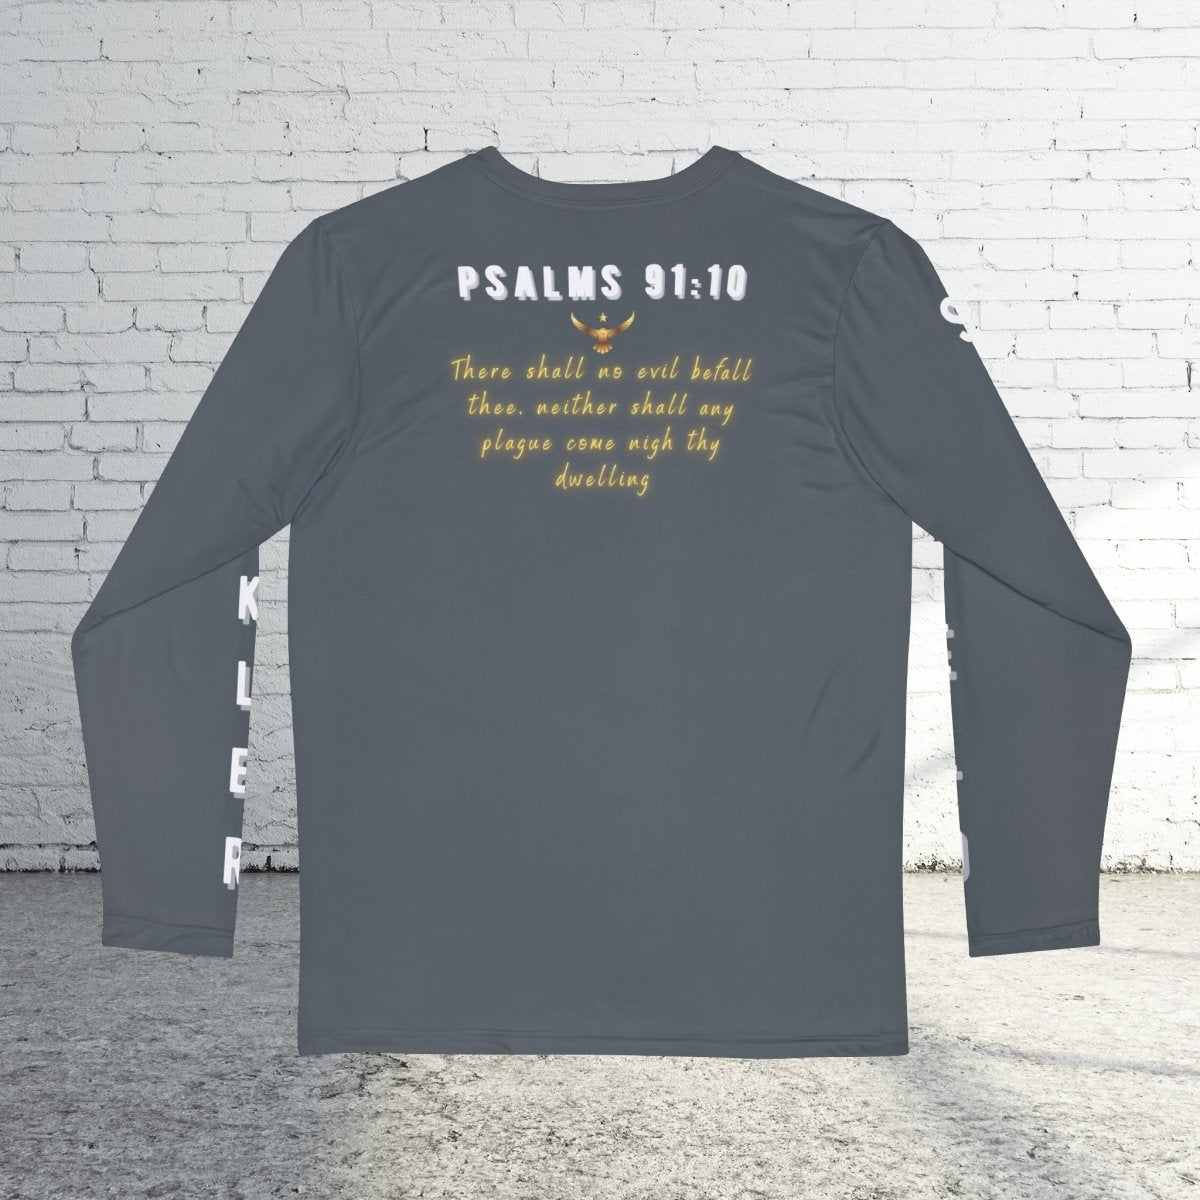 Women's "Protection" Collection: Psalms 91:10 with Shield & Buckler | Long Sleeve Shirts - Plain Vision Brand